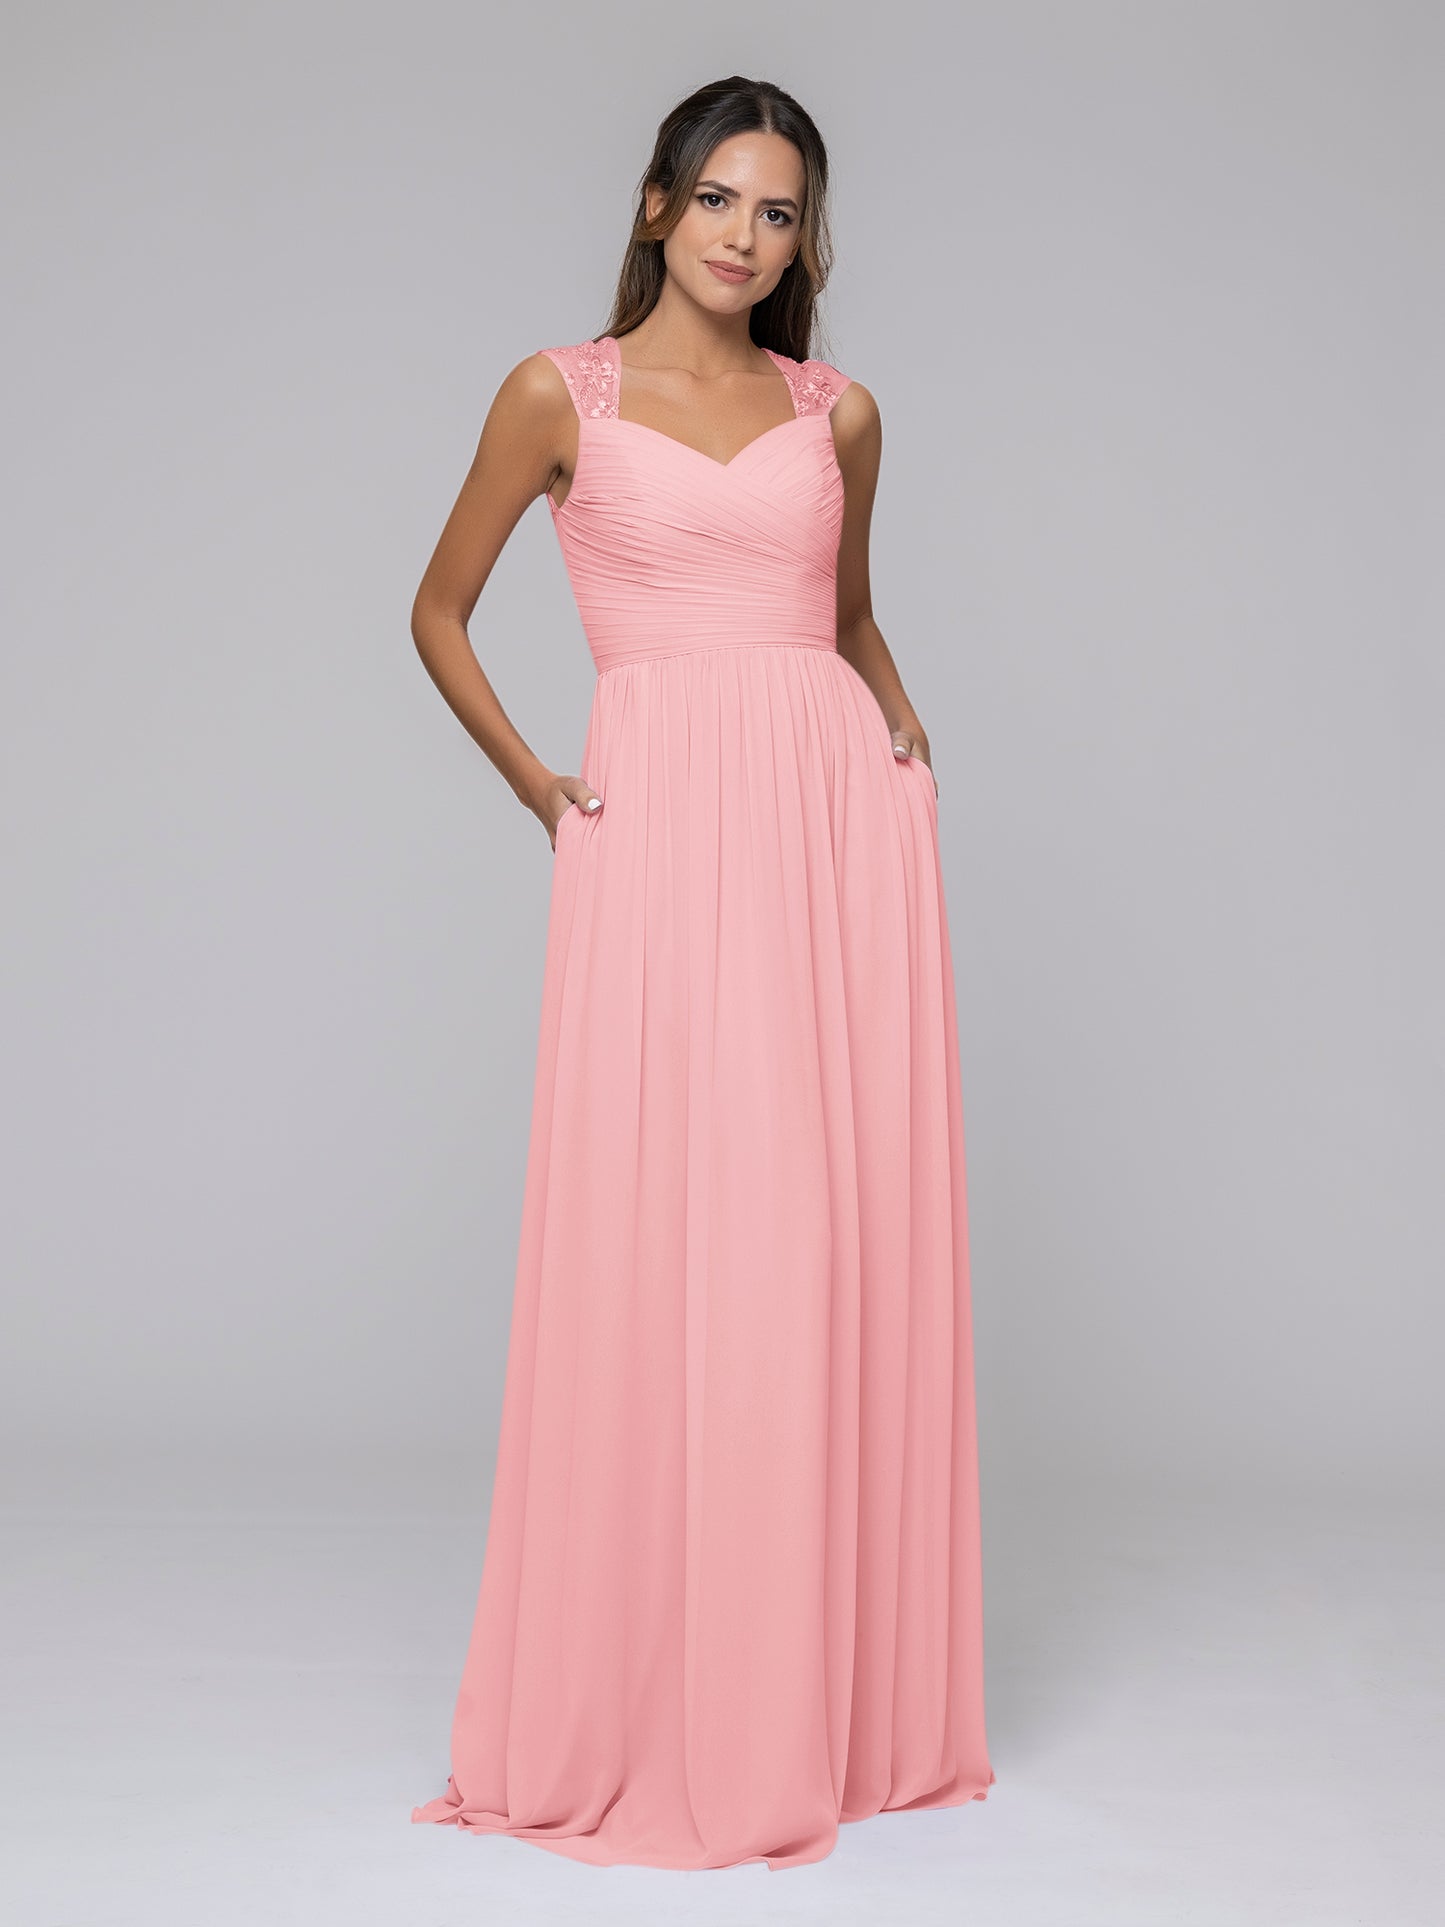 Chiffon Sweetheart Strap Long Bridesmaid Dresses With Pleated Bodice